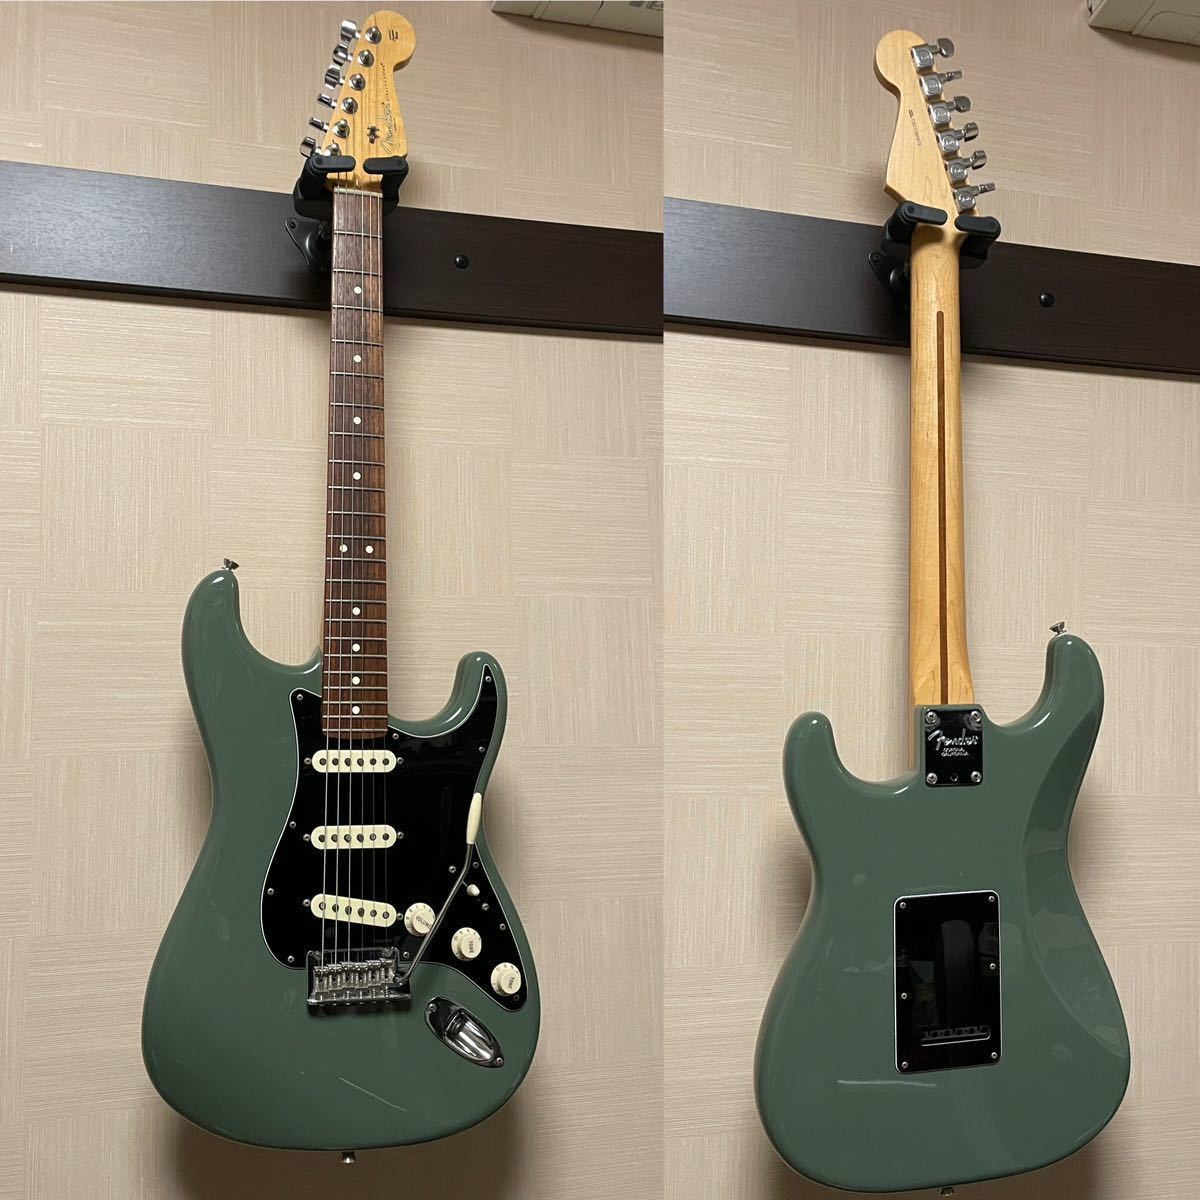 【Fender USA】American Professional Stratocaster Rosewood Fingerboard Antique Olive フェンダー ストラトキャスター_画像3